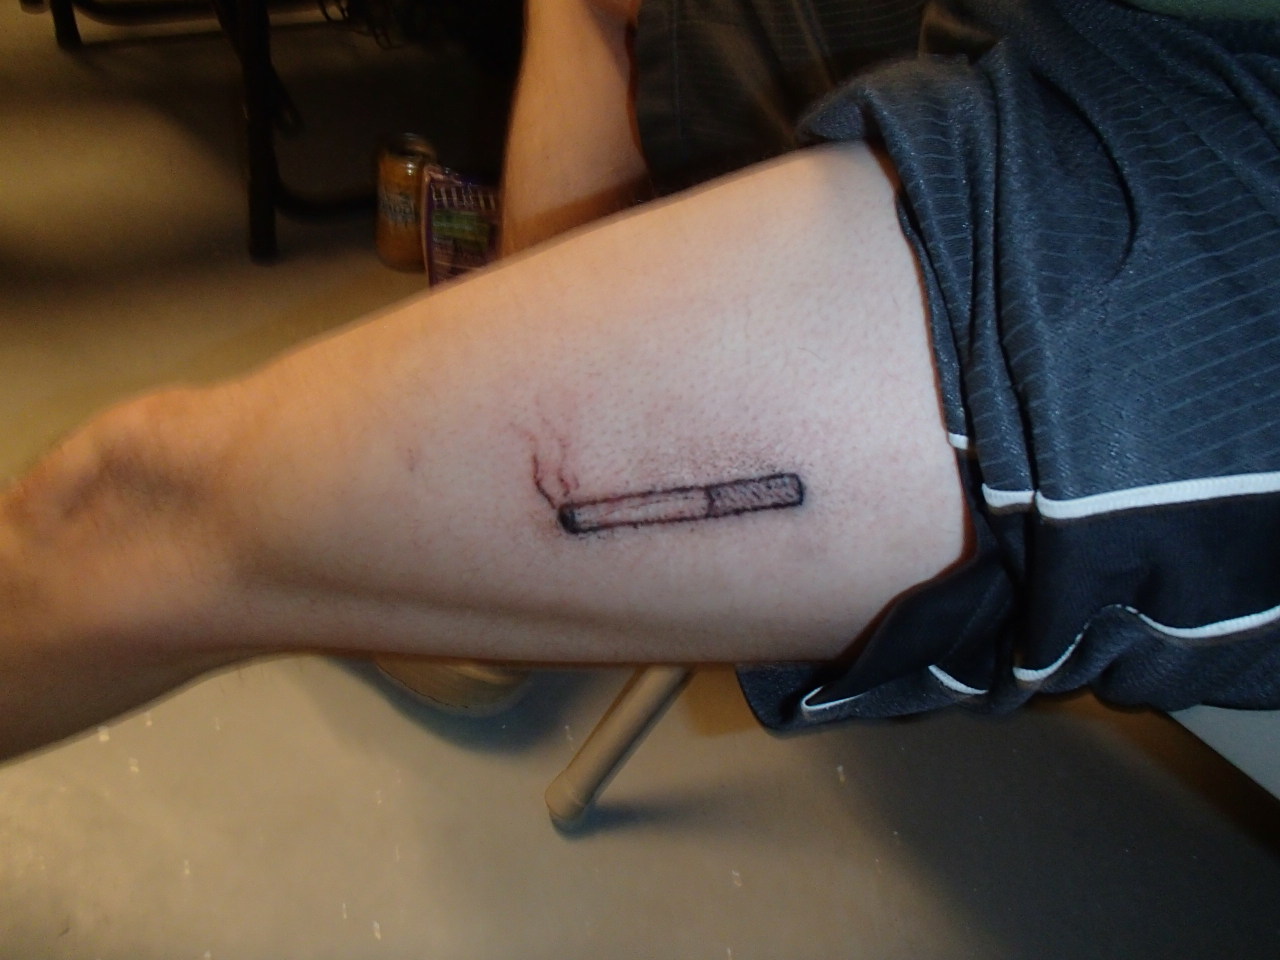 Stick and poke tattoo with pen ink